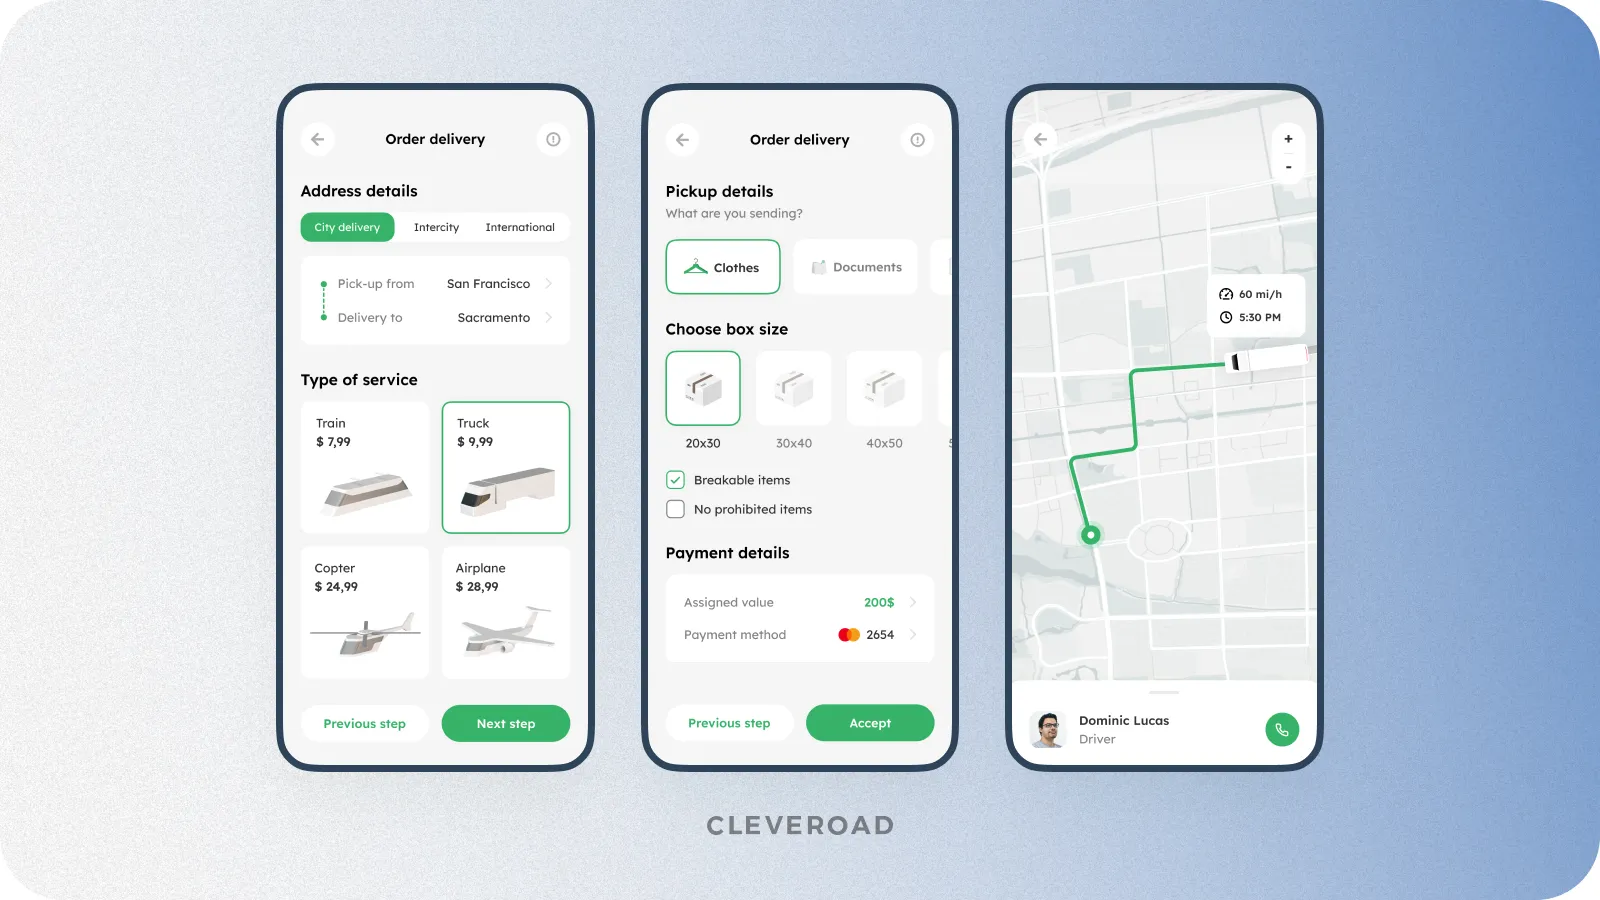 Example of on-demand logistics app by Cleveroad